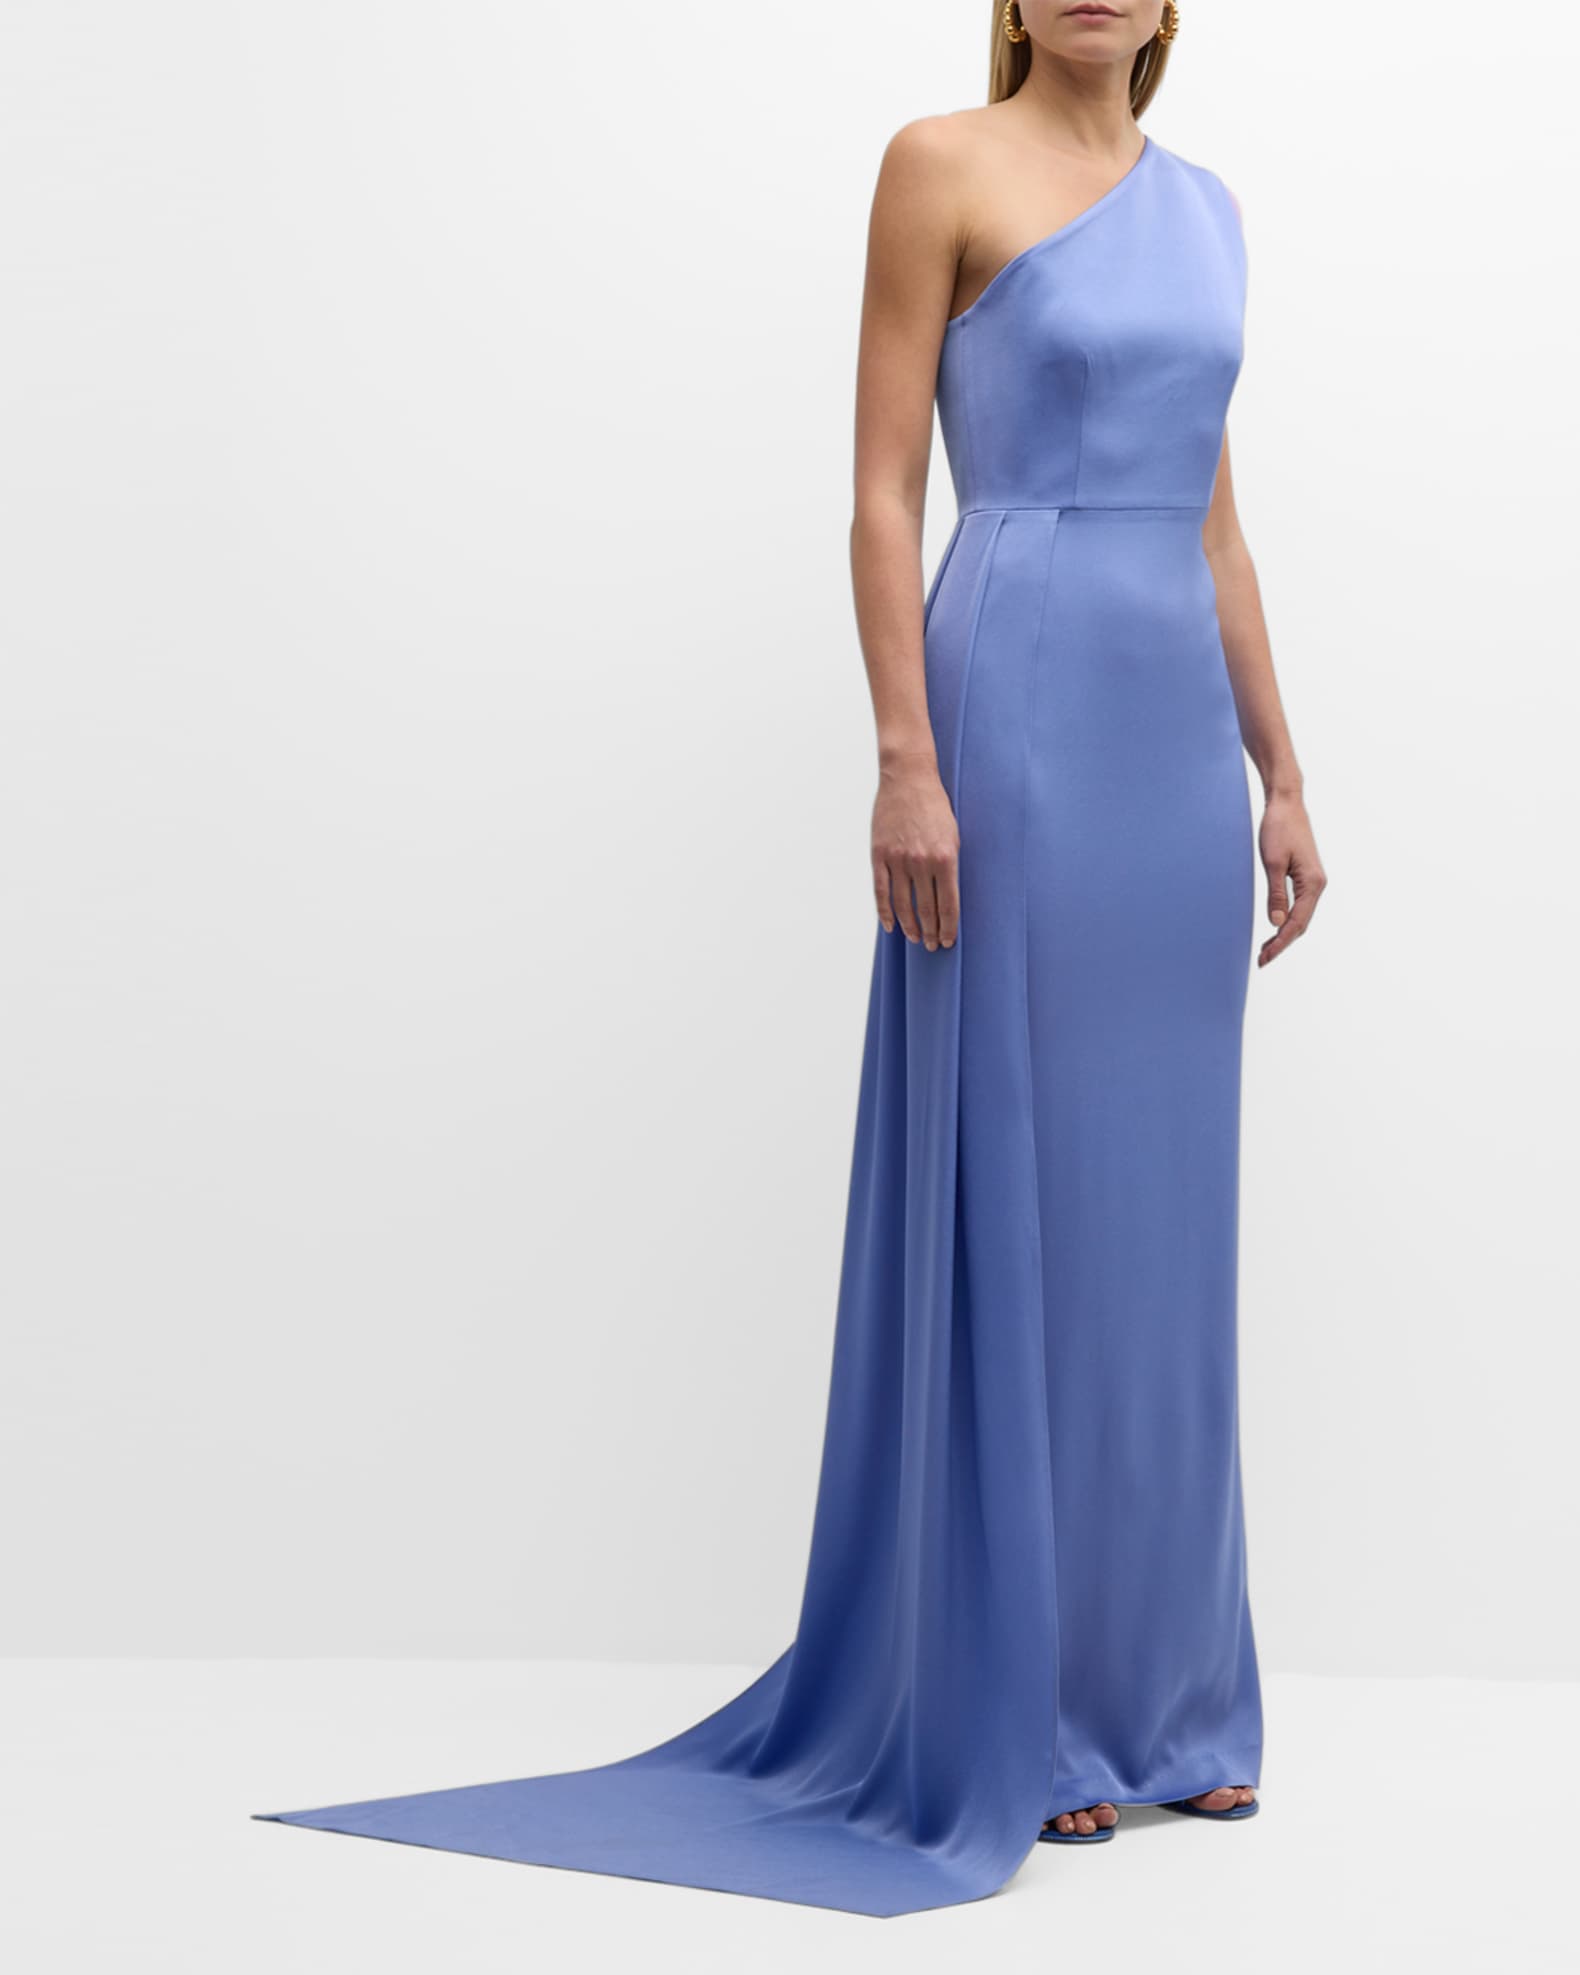 Alex Perry Satin Crepe One-Shoulder Column Gown with Sash | Neiman Marcus